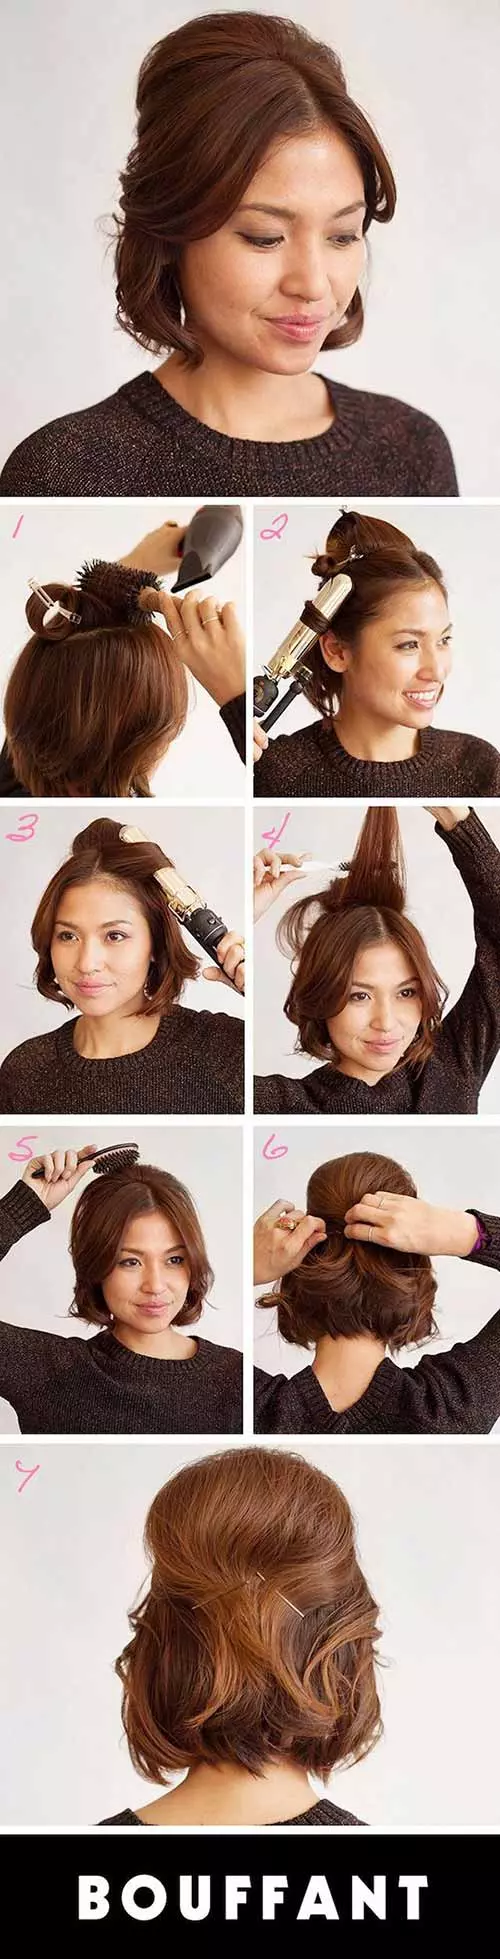 The boufffant diy short hairstyle